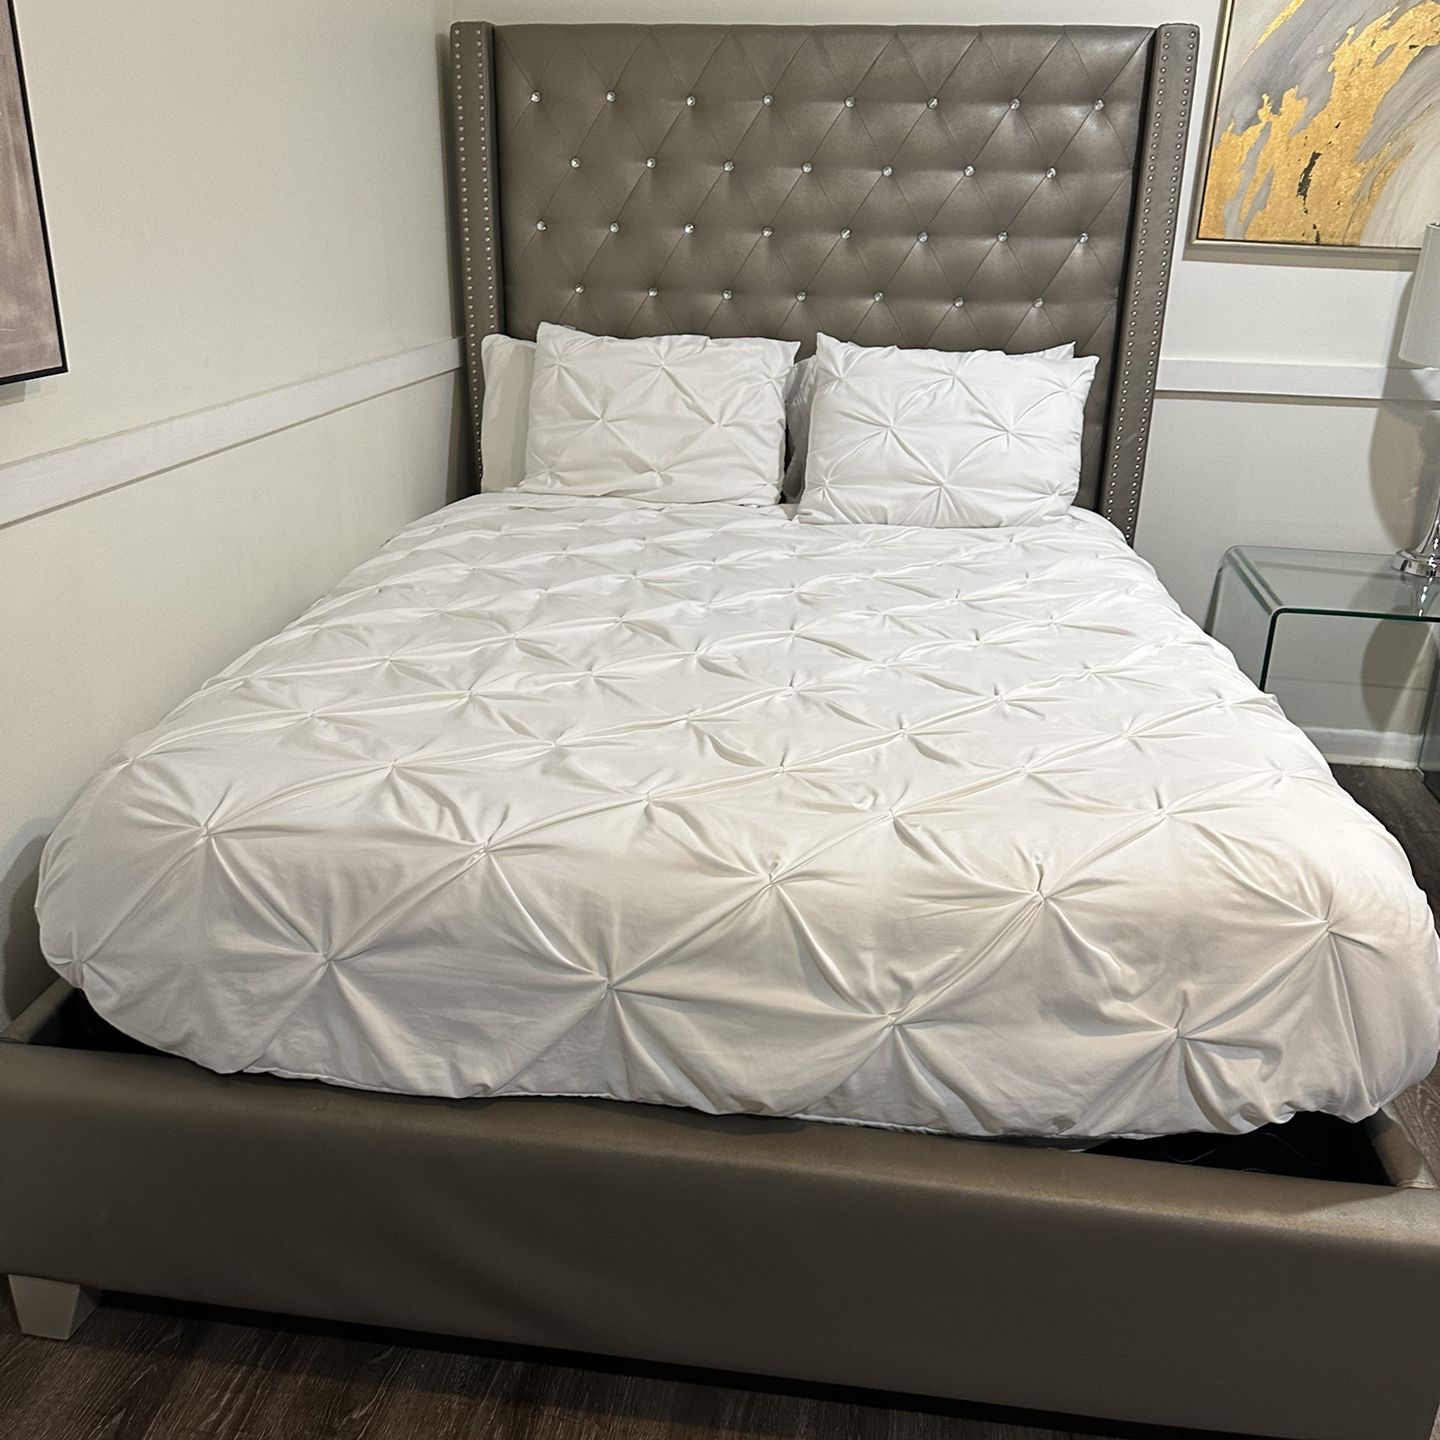 Queen Bed, Frame Only $300